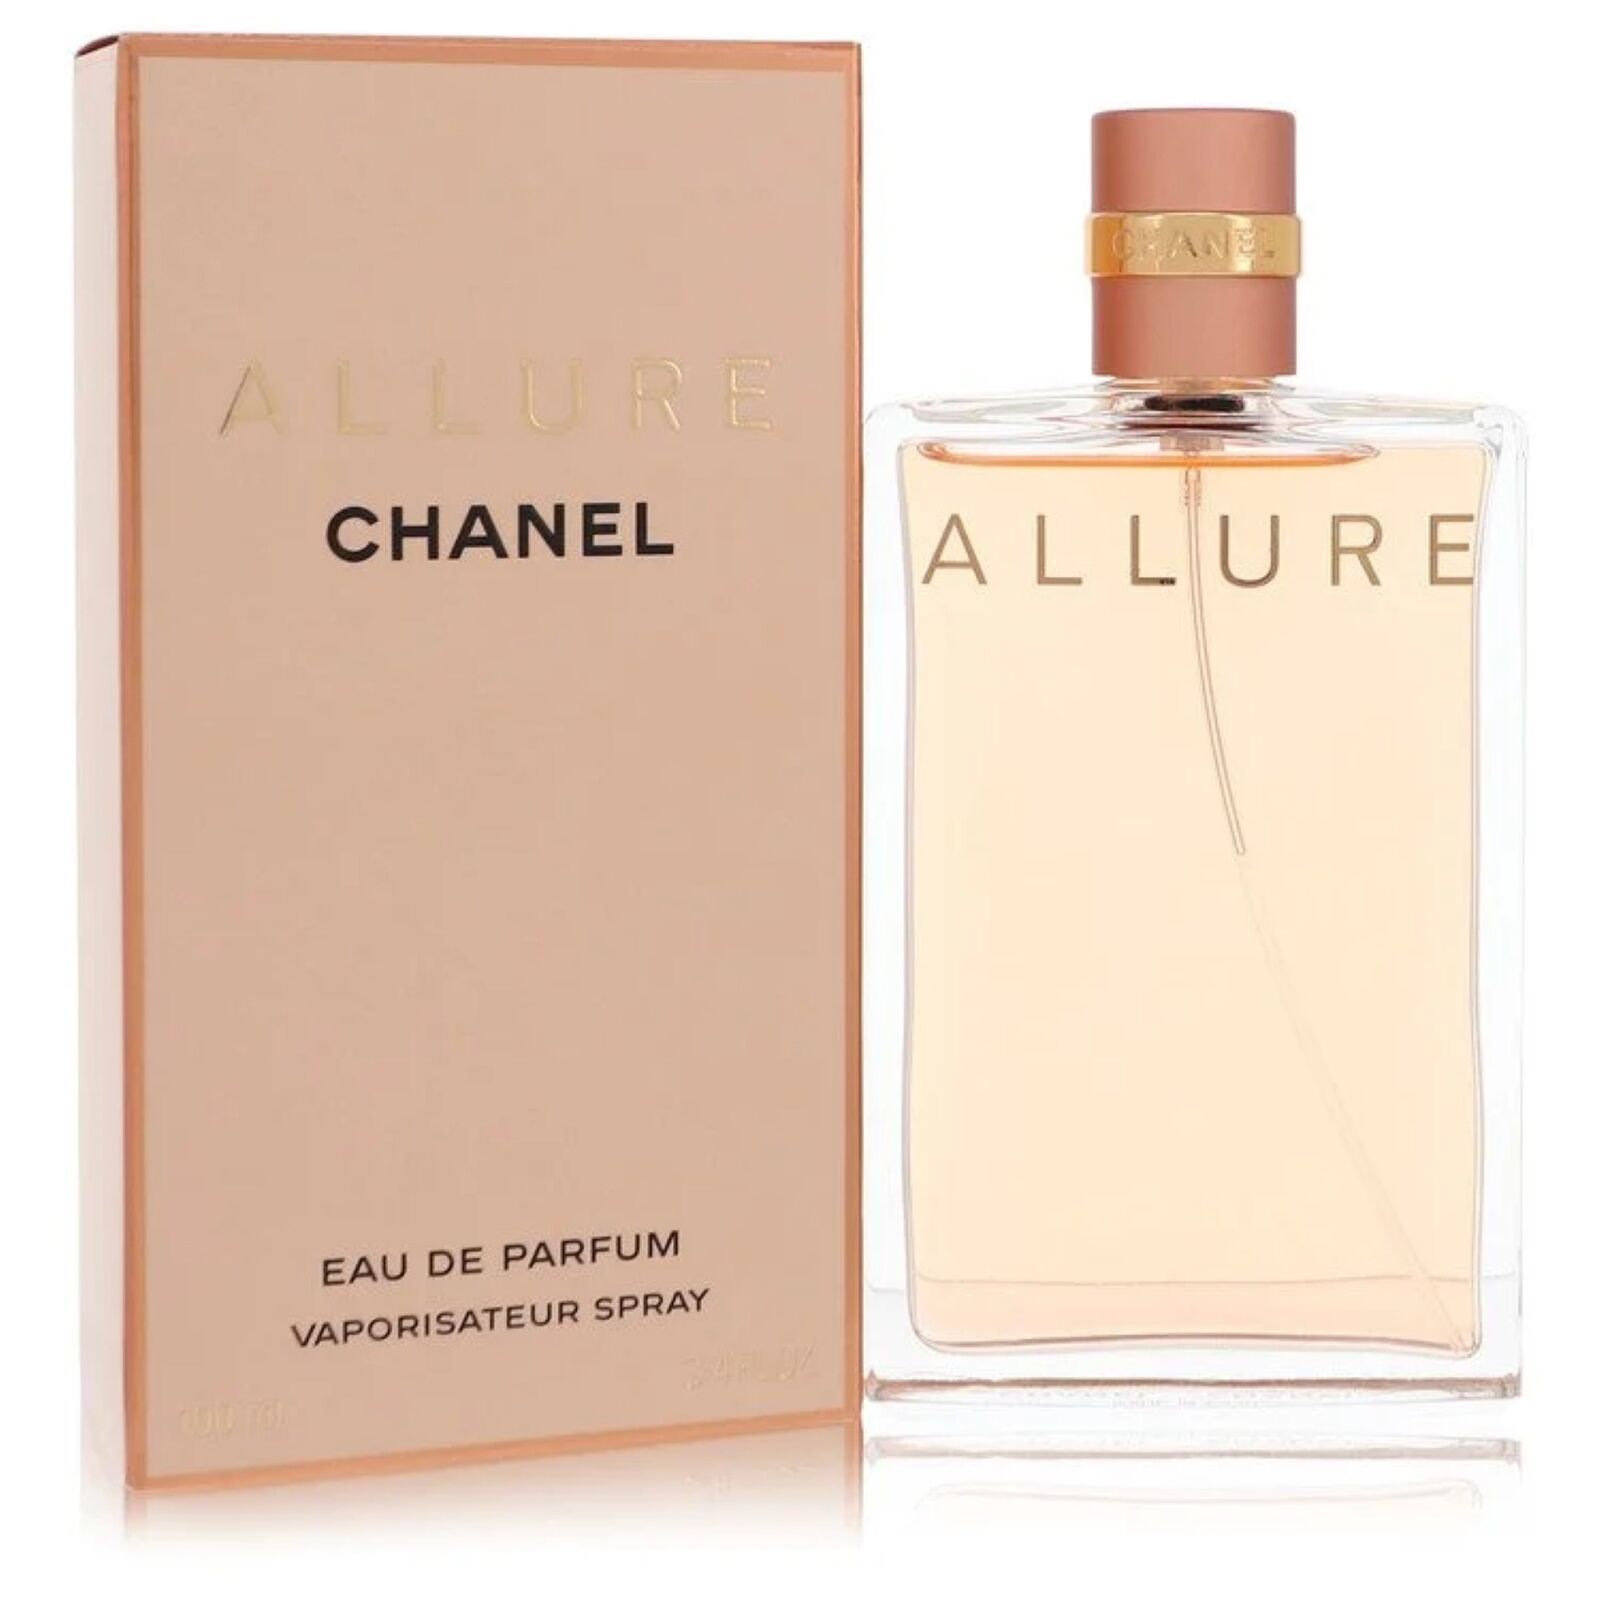 Allure EDT Spray Perfume for Women by Chanel